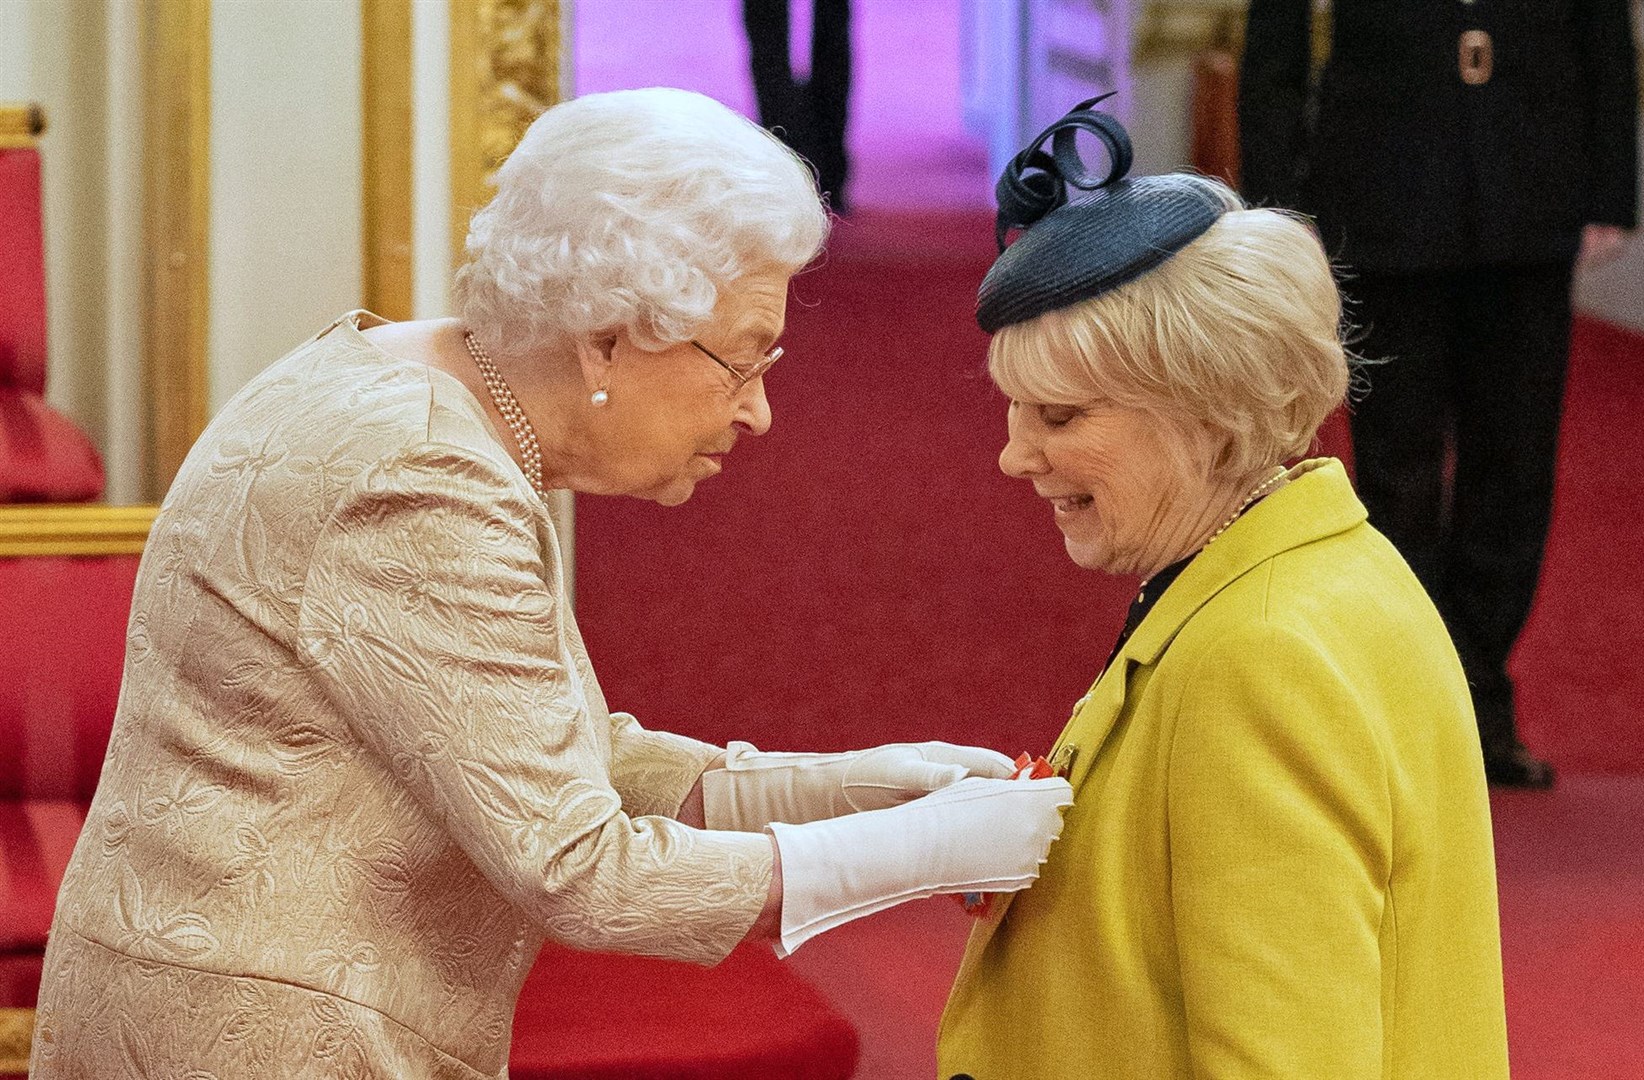 The Queen was pictured wearing gloves for the first time at a palace investiture in March last year (Dominic Lipinski/PA)